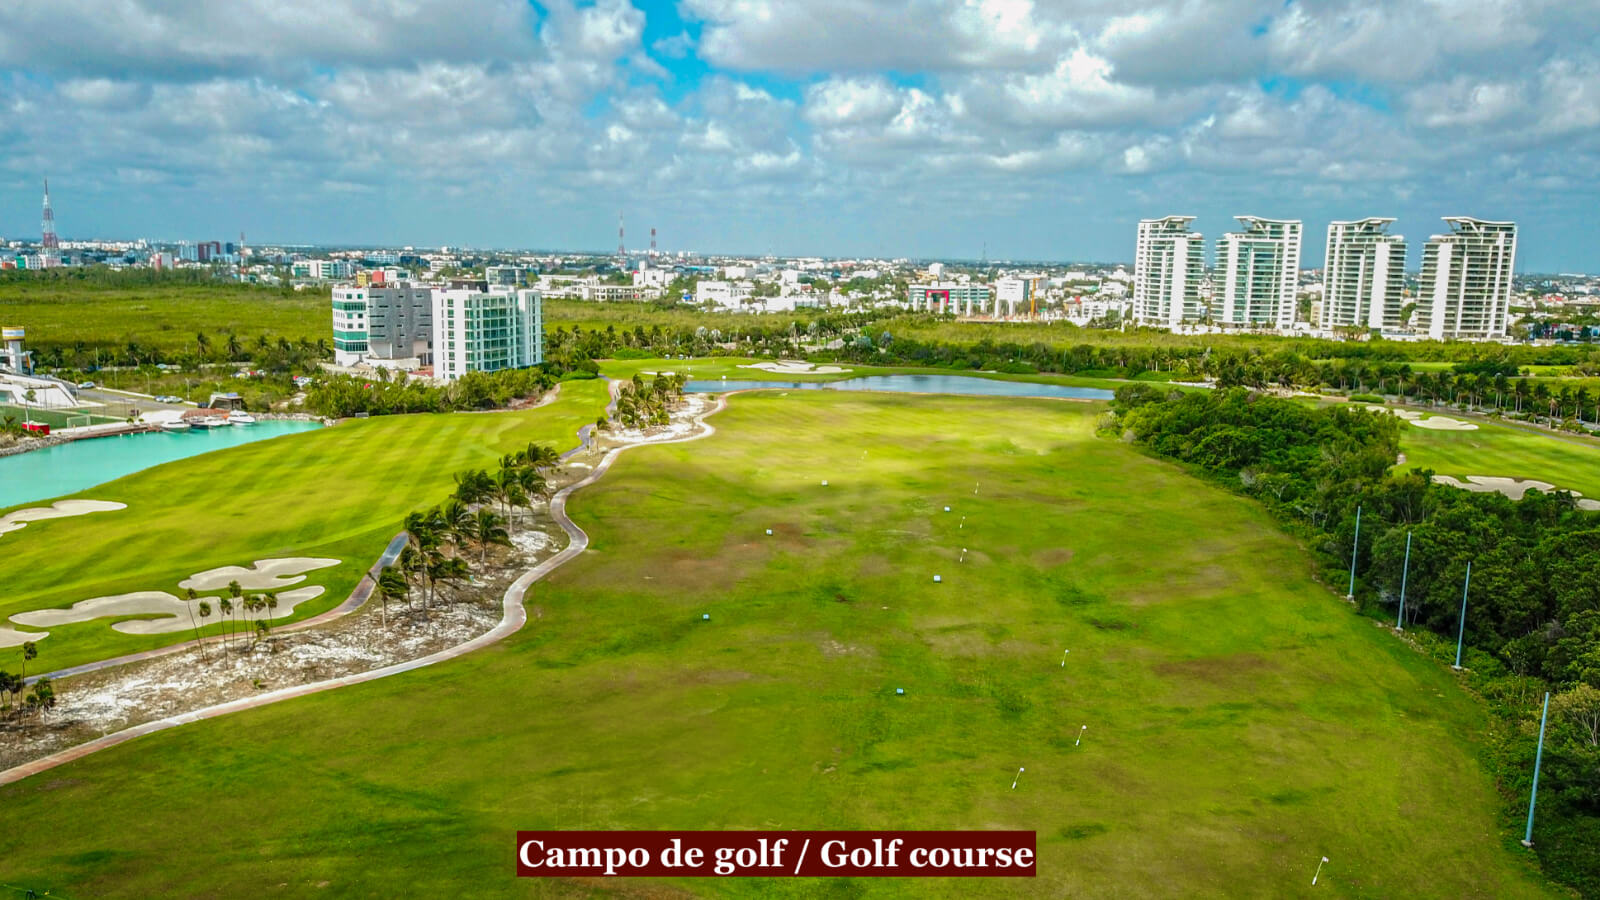 Ocean view penthouse in luxury sustainable building with golf course, and nature reserve. Fully equipped and with amenities